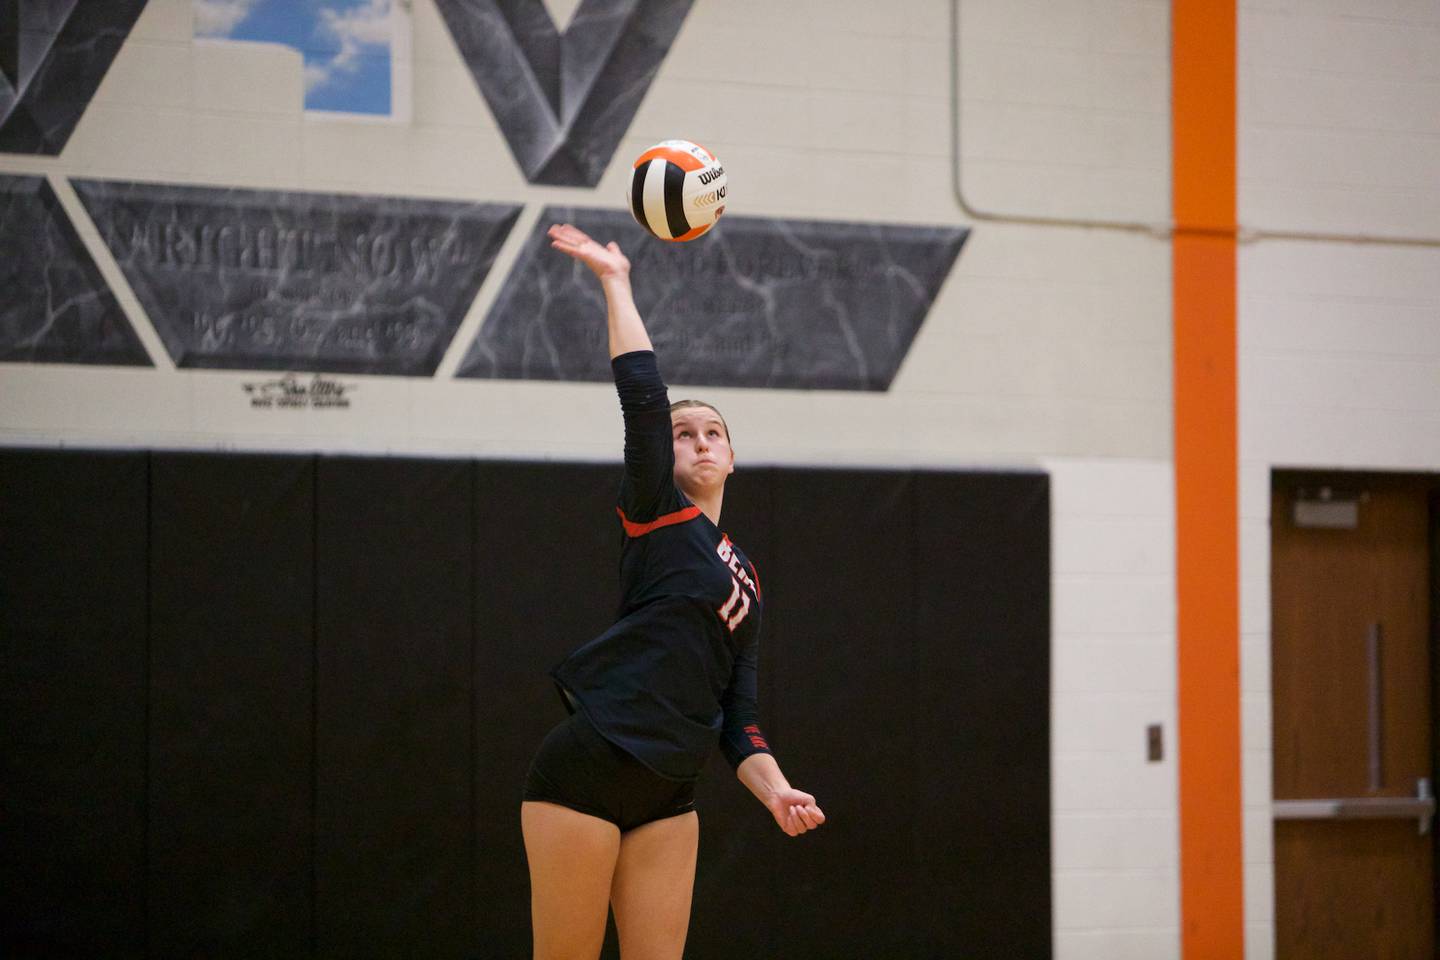 Benet's Ava Ledebuhr serves the ball against Marist at the Wheaton Classic on Saturday, Sept. 16,2023 in Wheaton.